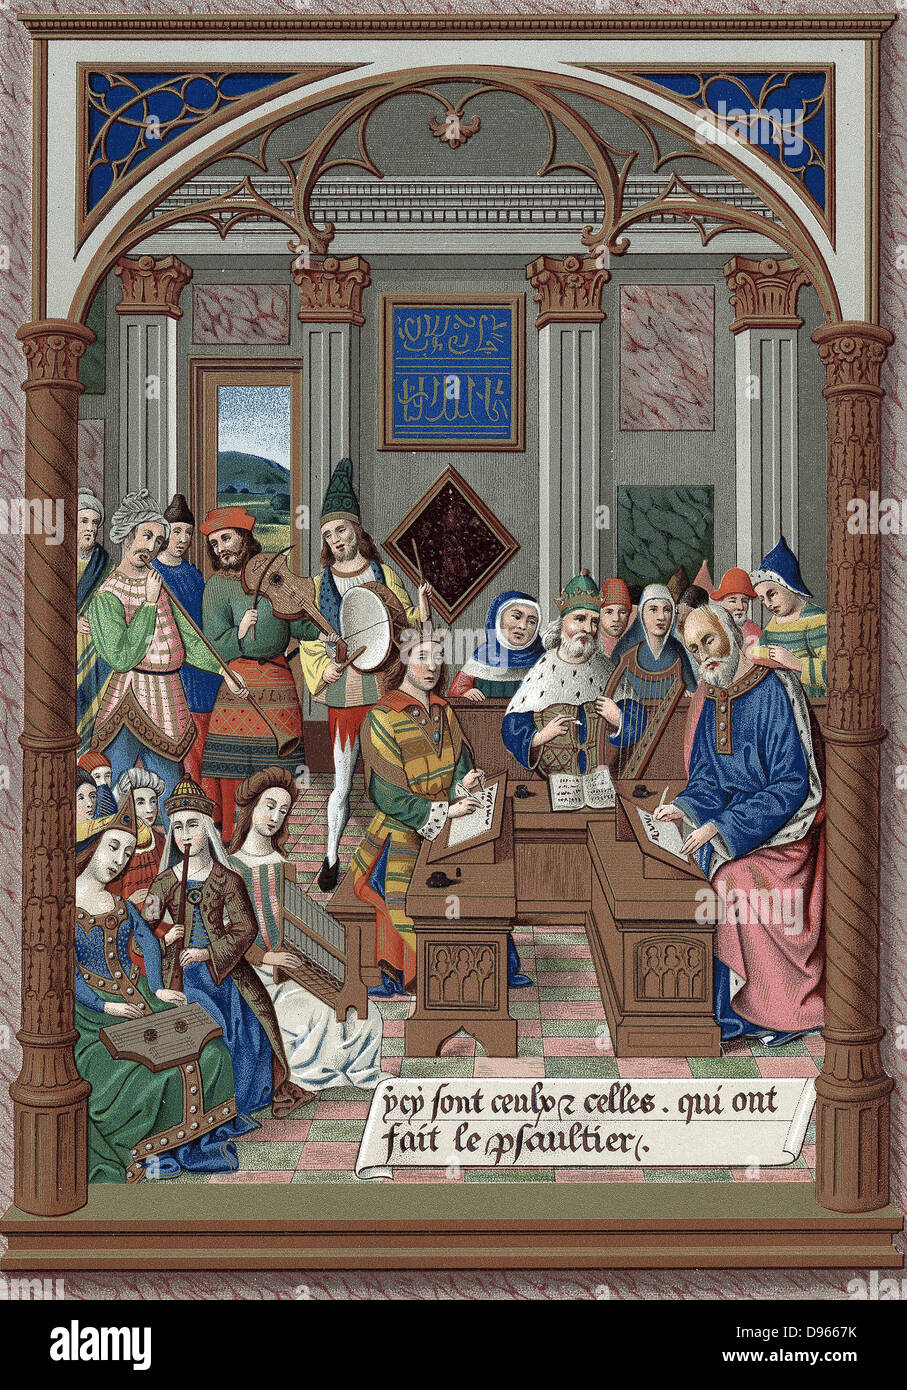 King Rene and his musical court. Rene (1409-80) Duke of Anjou and Lorraine, King of Naples, Jerusalem and Sicily. Arab/European interface - see writing on back wall. After 15th century manuscript of 'Breviary' of King Rene. Chromolithograph Stock Photo